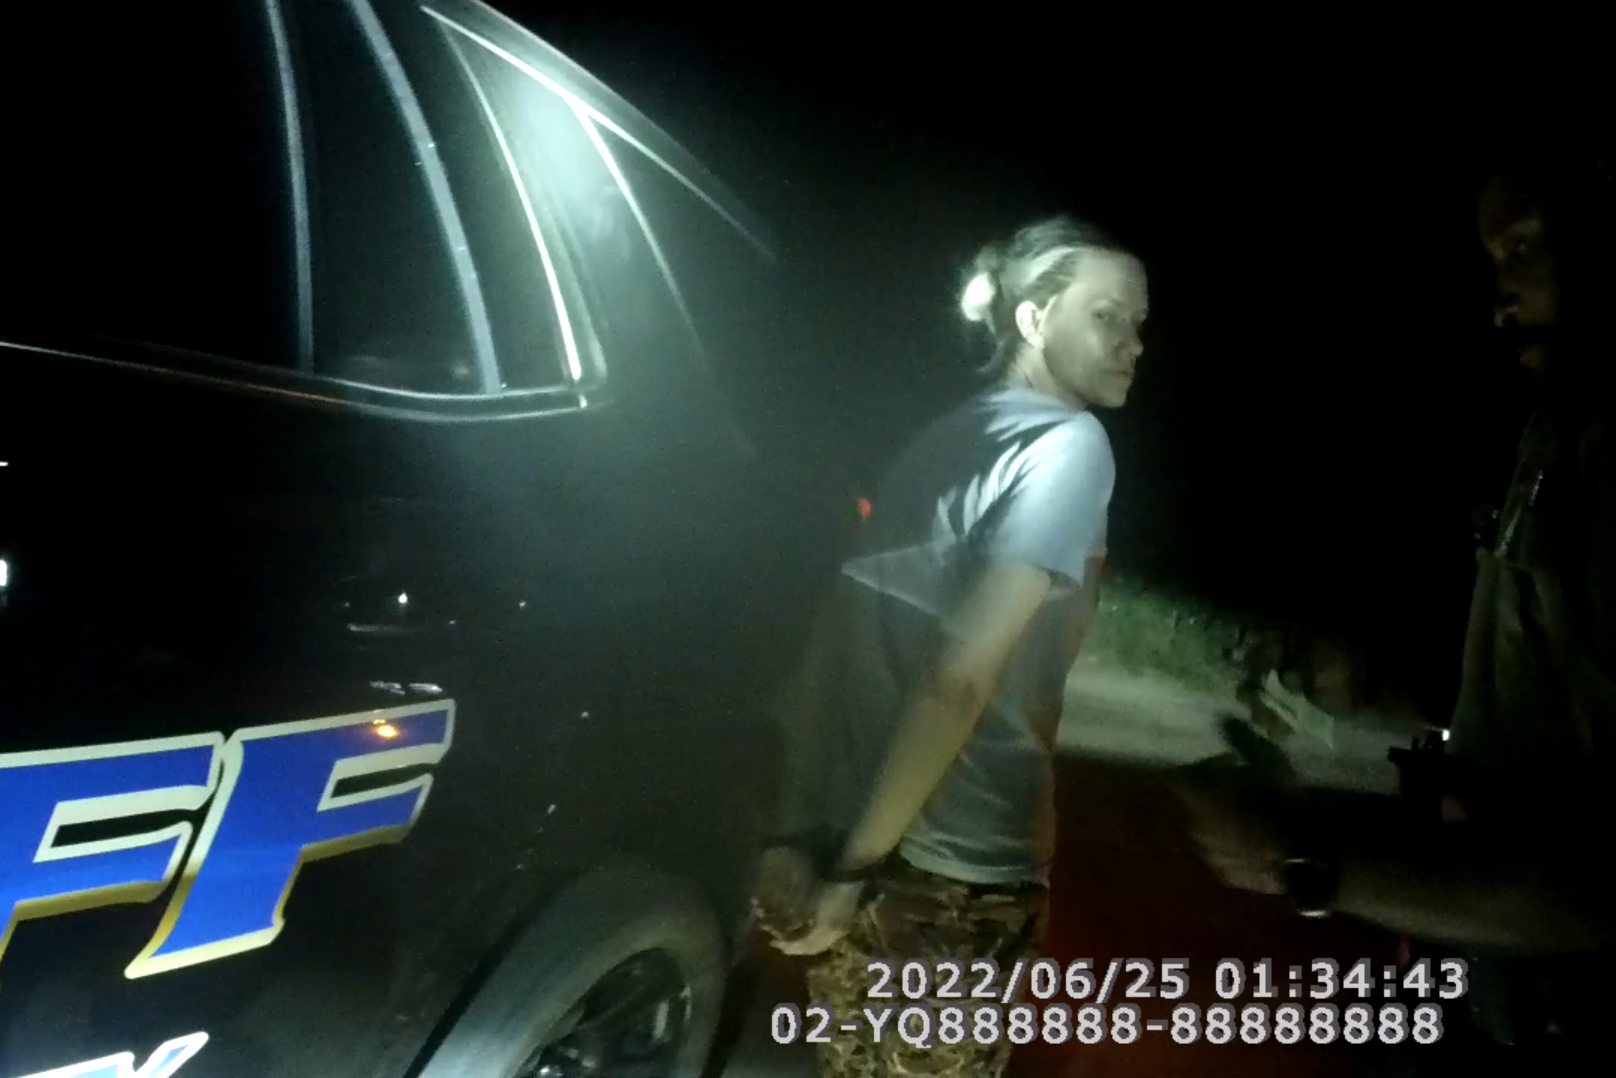 A screengrab of Angela Collier in handcuffs next to a police car at night.